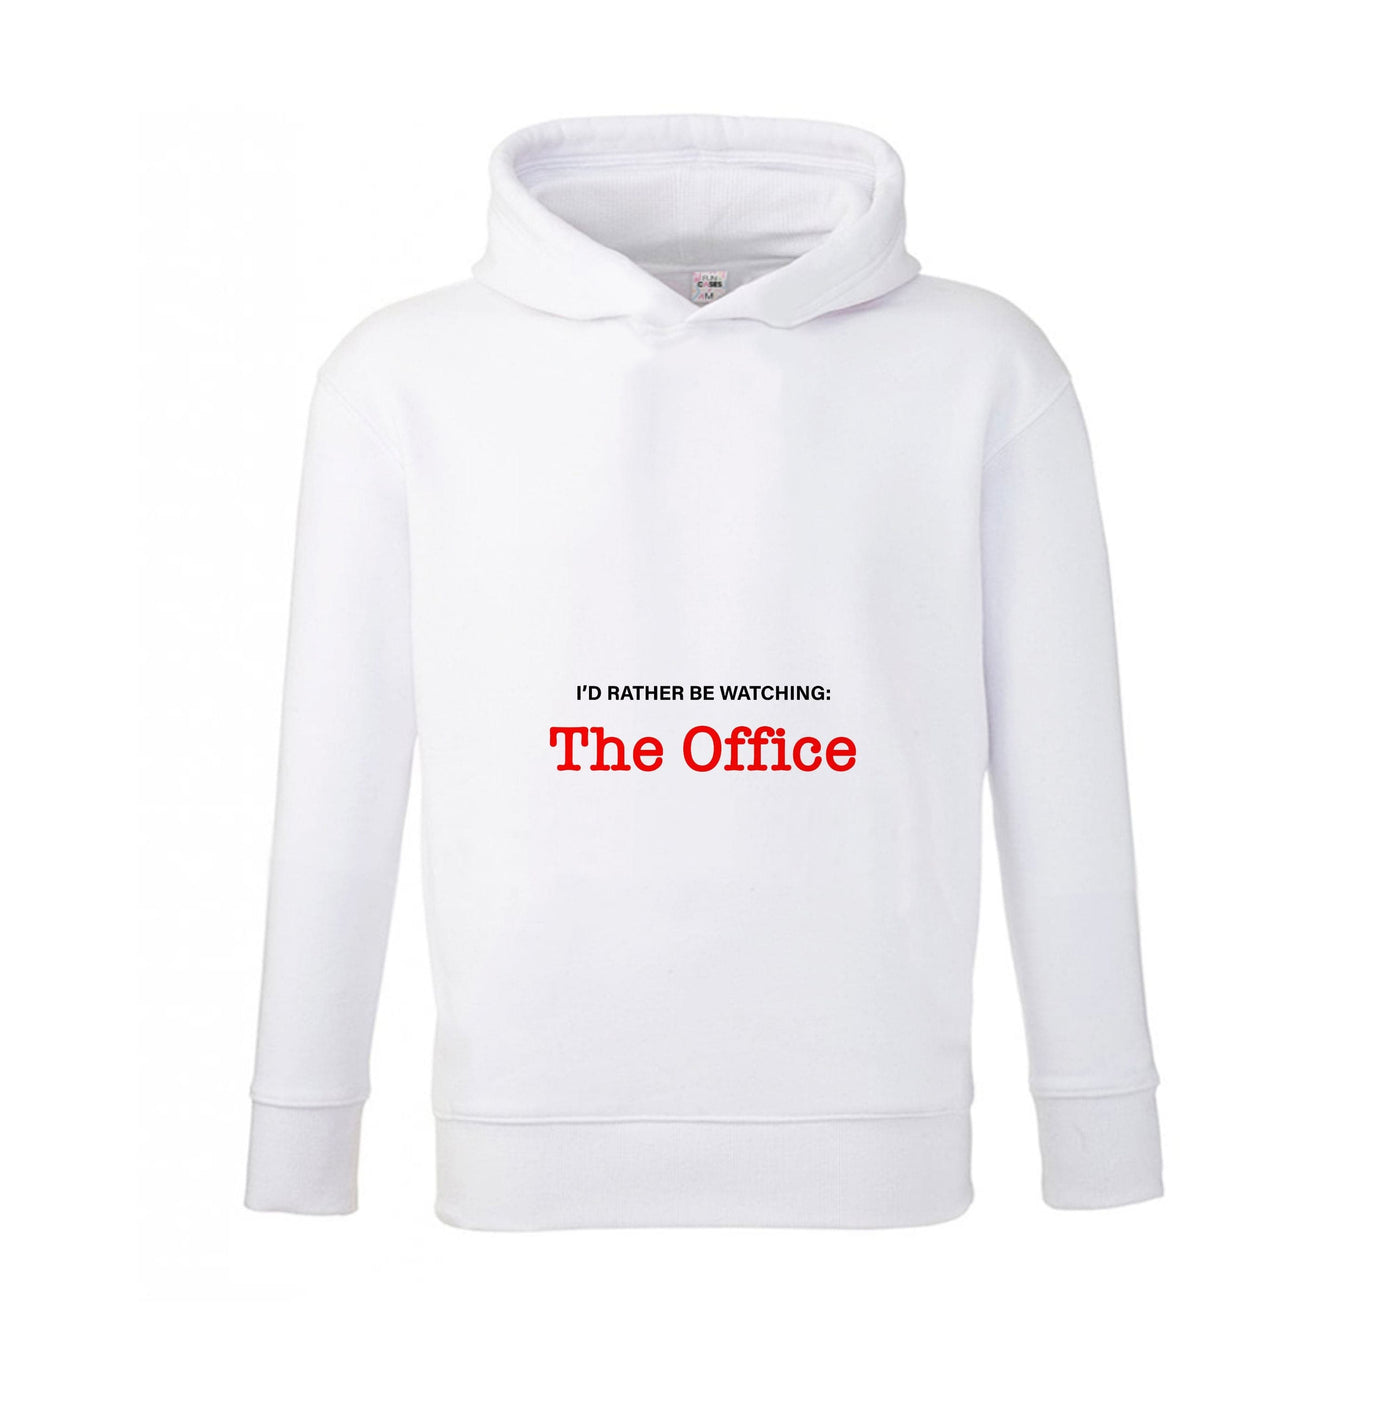 I'd Rather Be Watching The Office - The Office Kids Hoodie